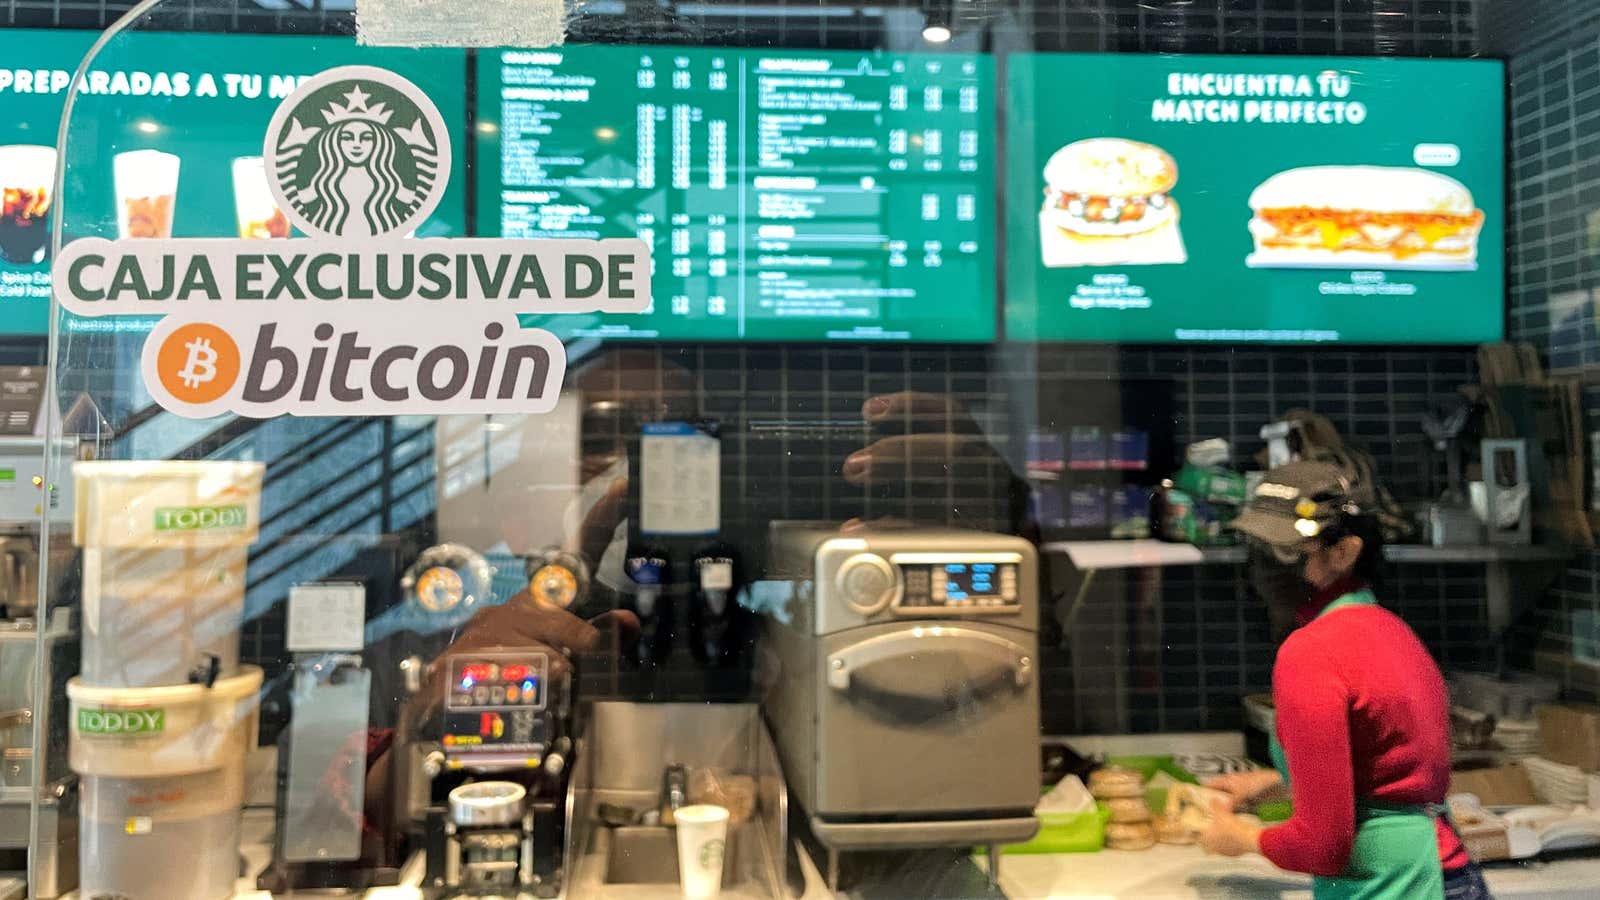 “Can I get fries with my bitcoin?”